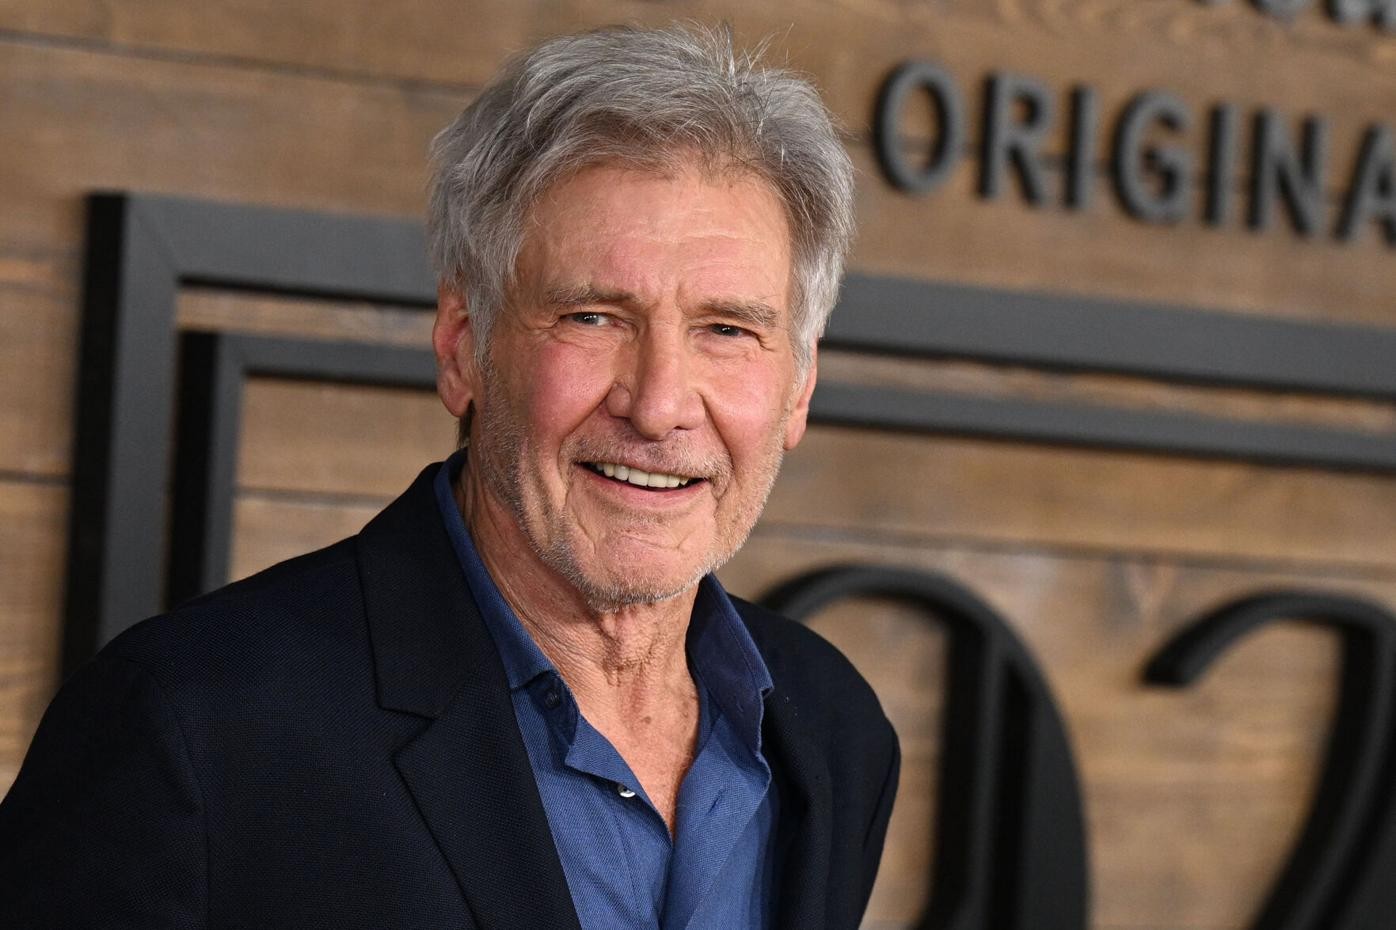 Harrison Ford, American actor